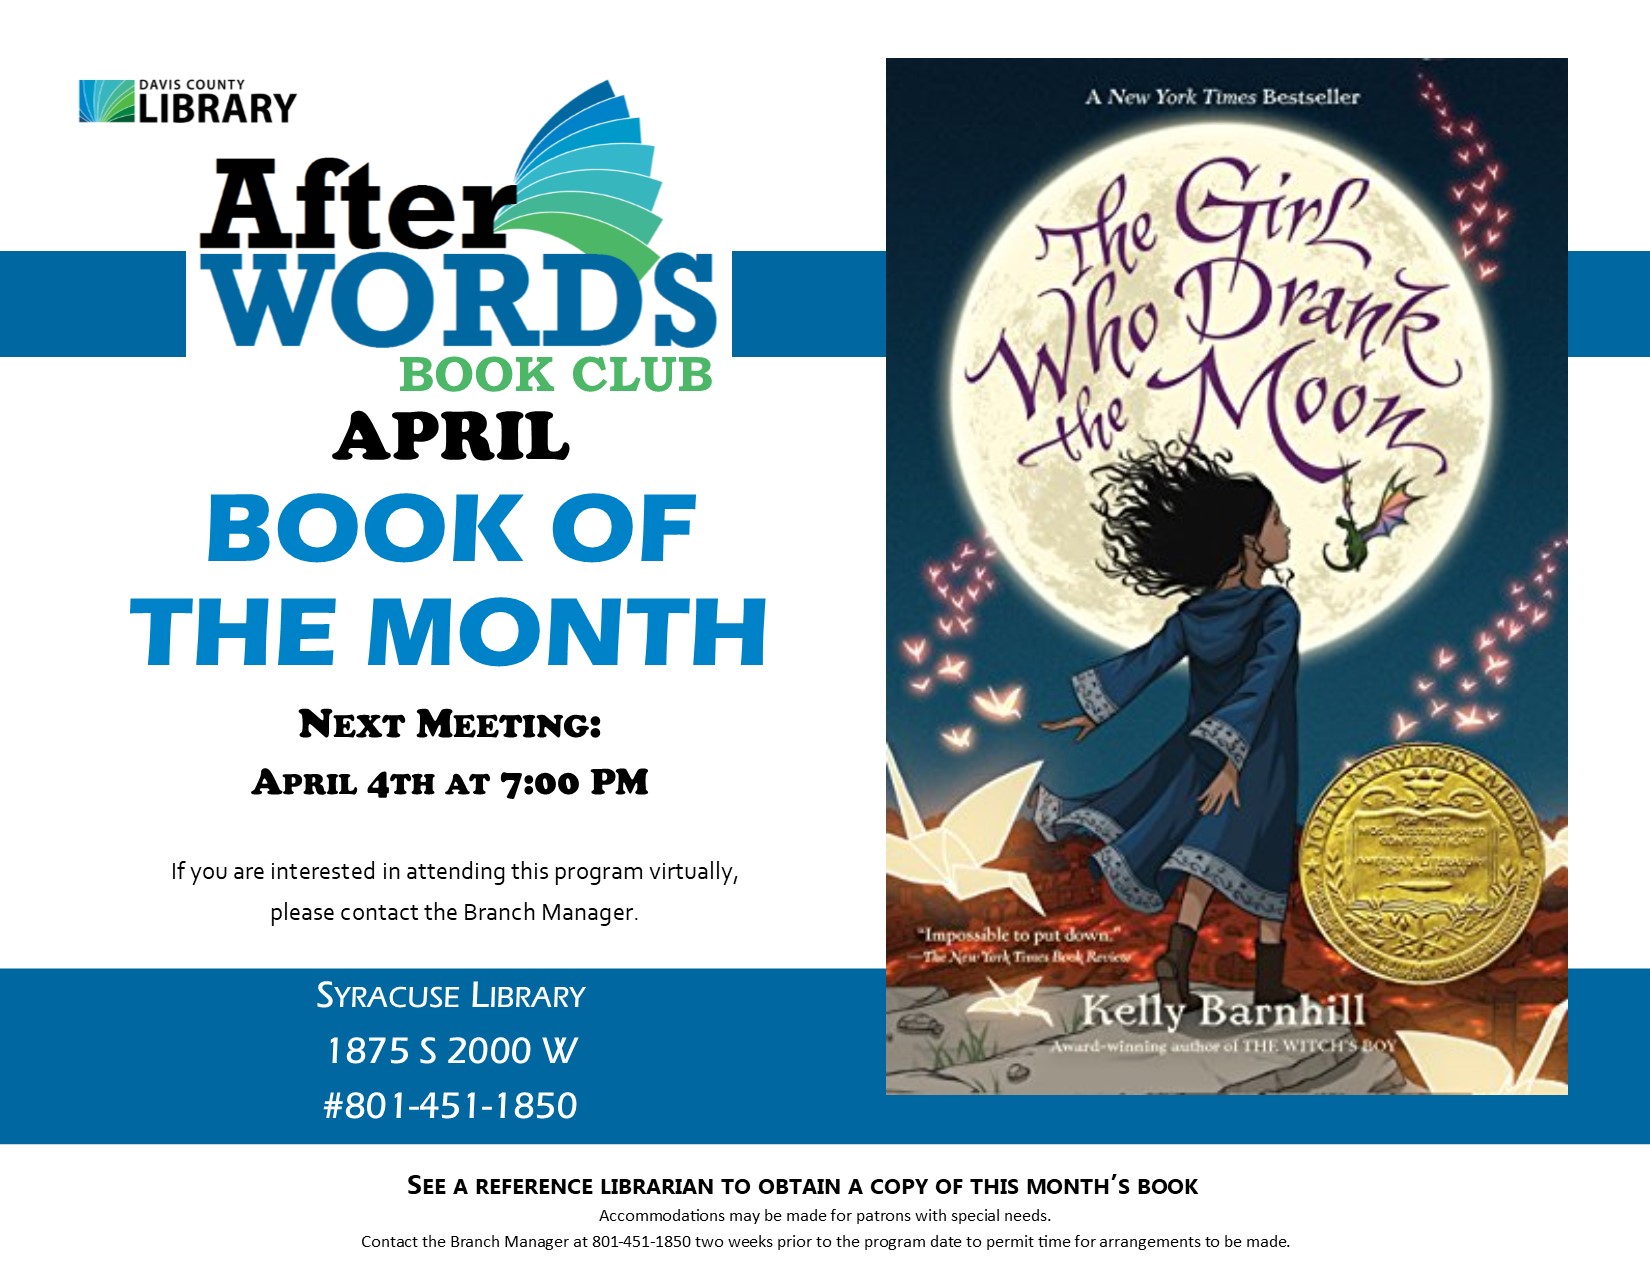 After Words Book Club @ 7pm The Girl Who Drank the Moon by Kelly Barnhill